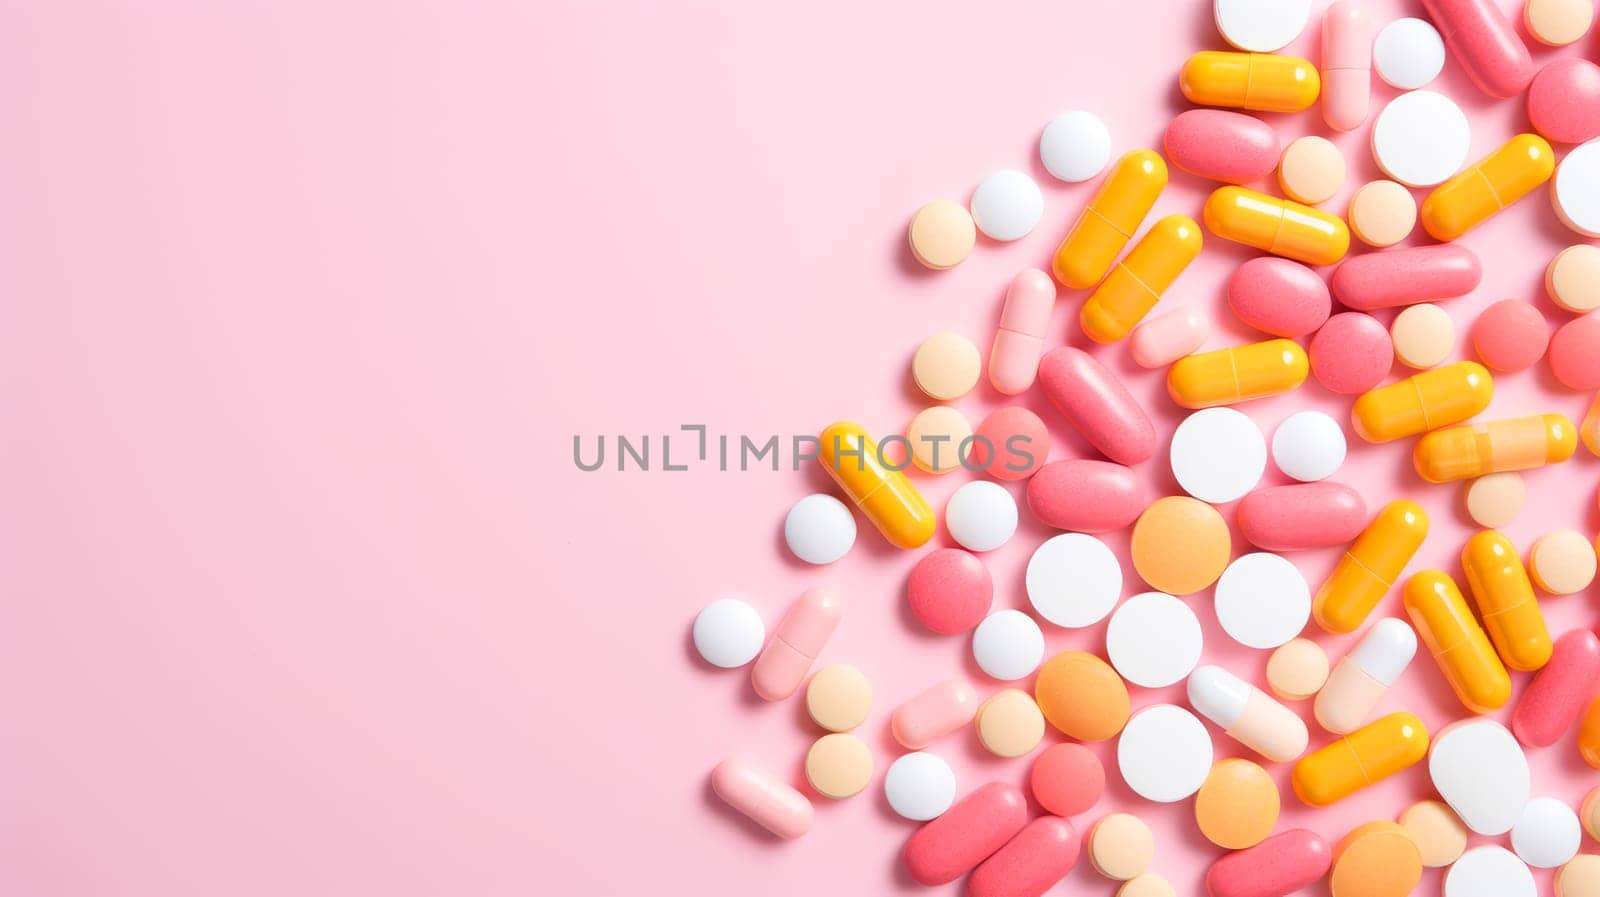 Multi-colored tablets, capsules and vitamins in a jar on a pink background. by Alla_Yurtayeva